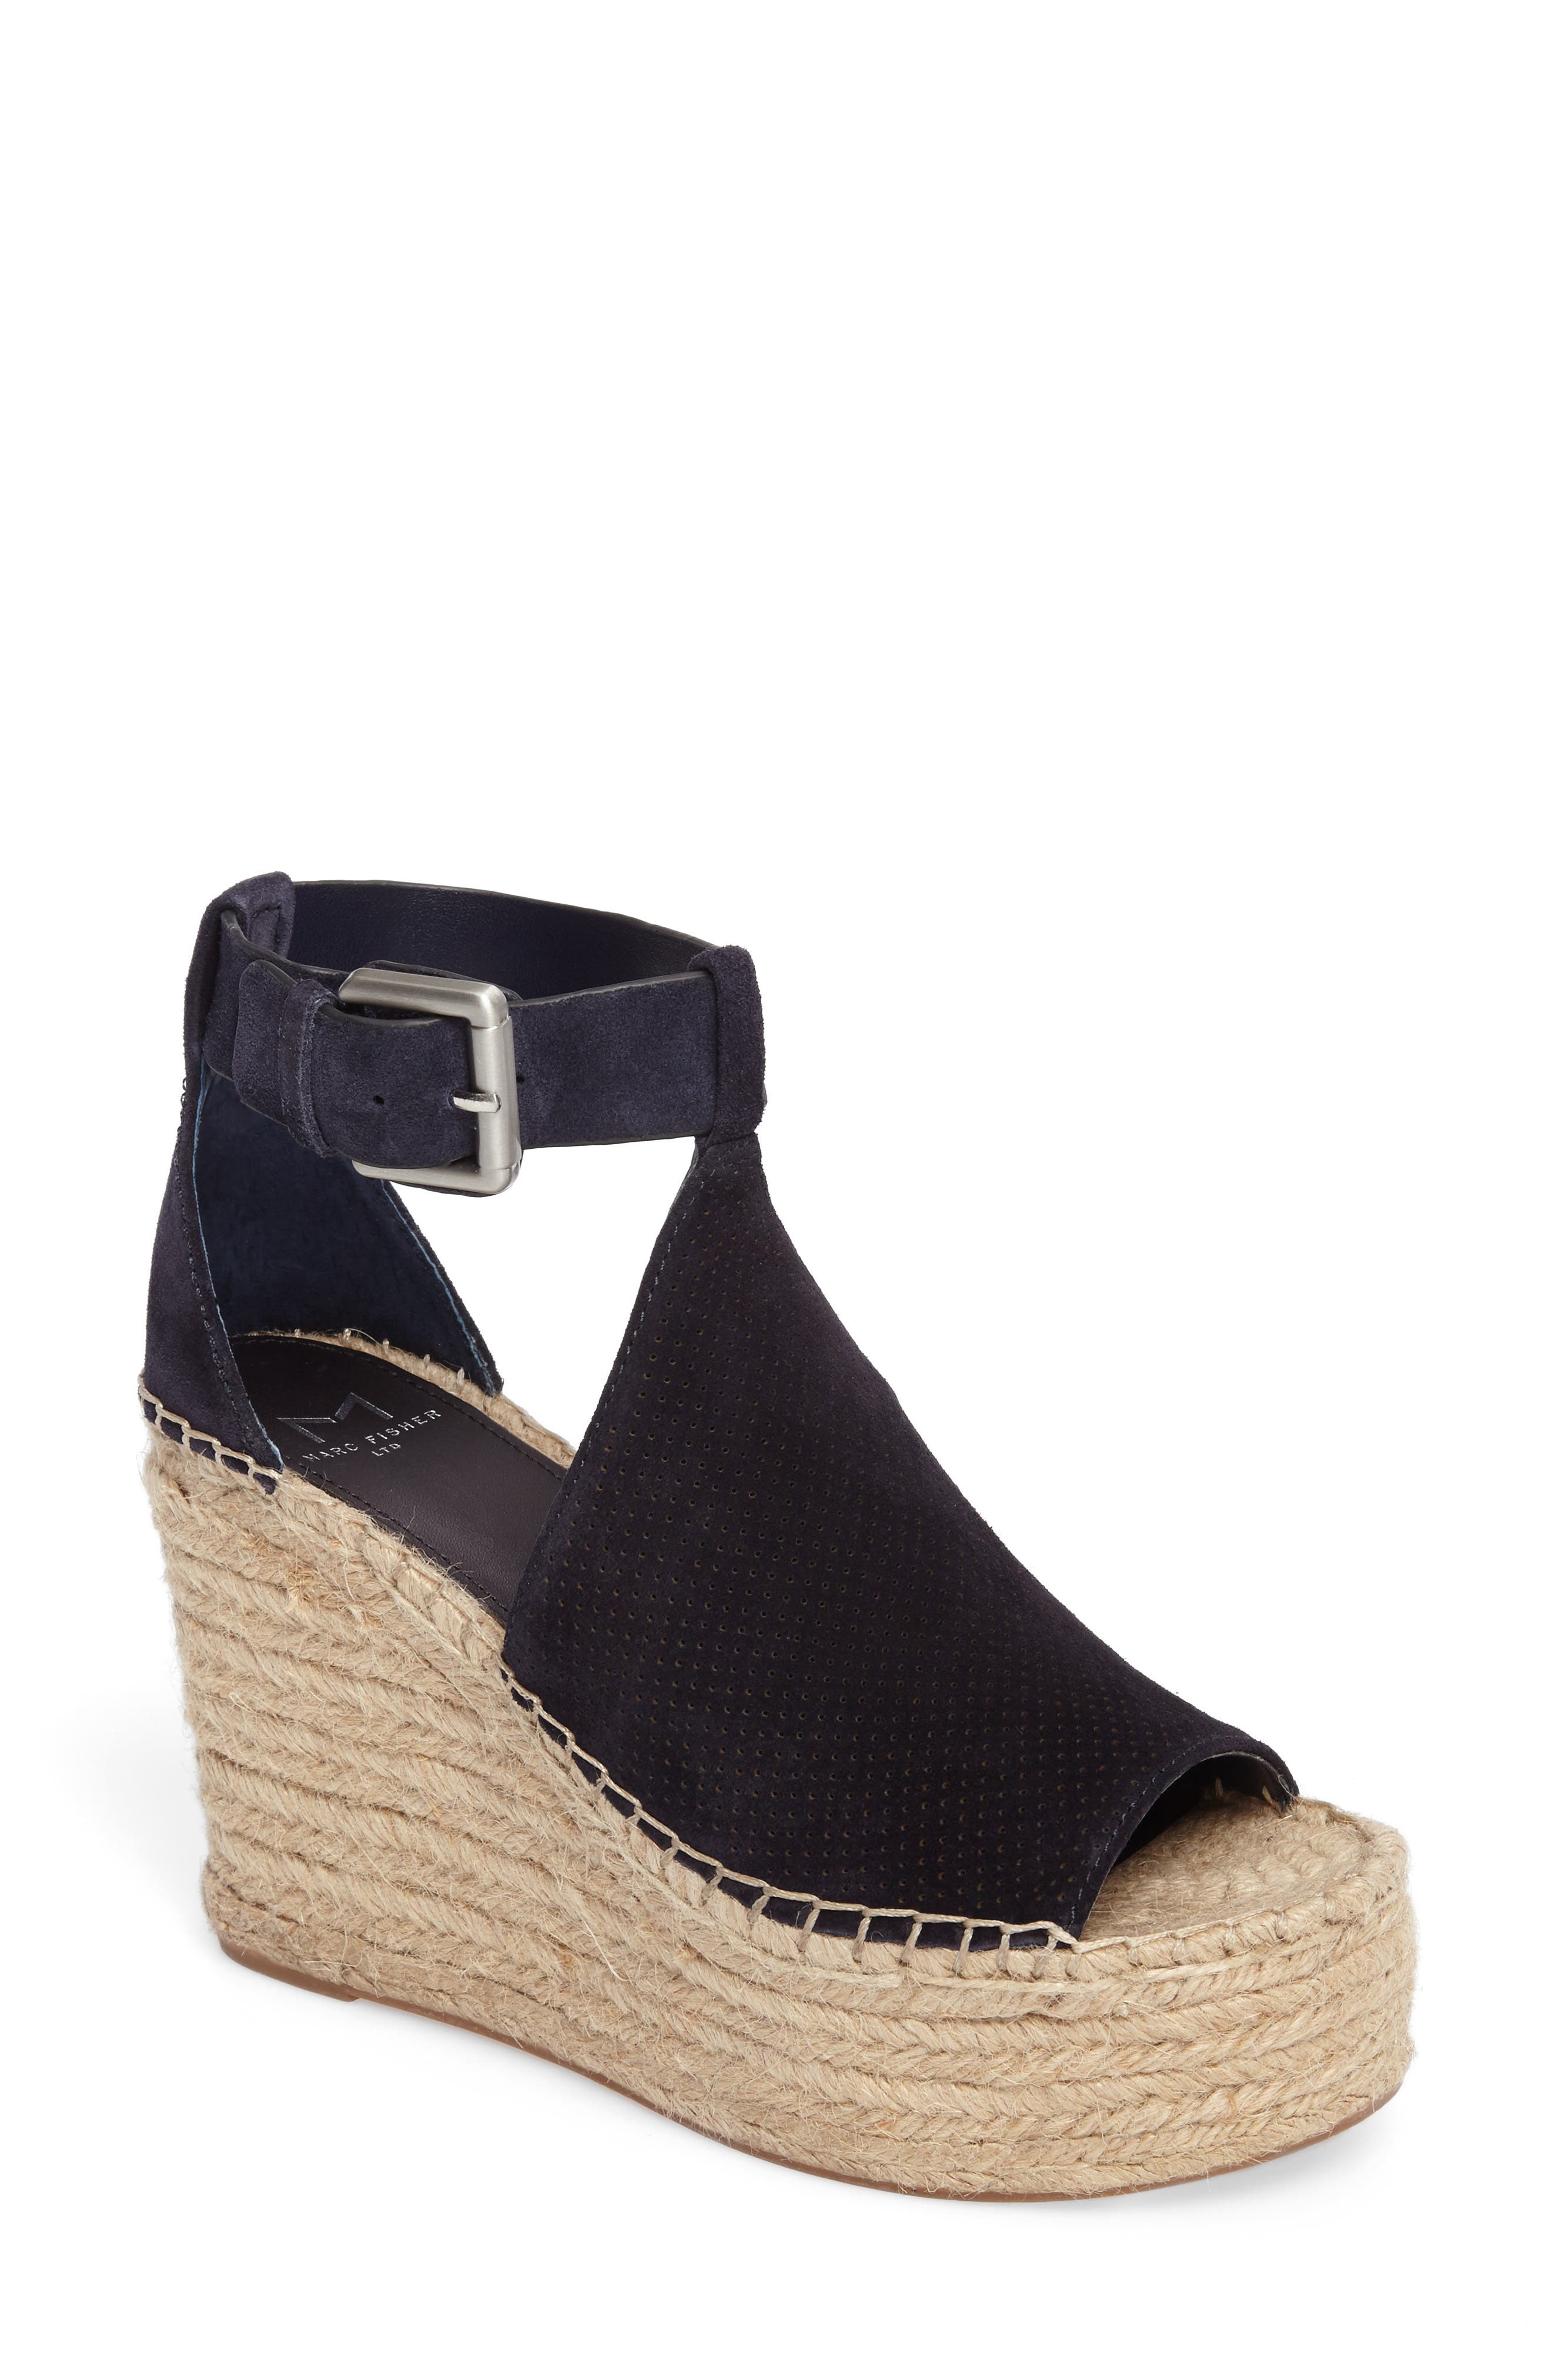 marc fisher annie perforated espadrille